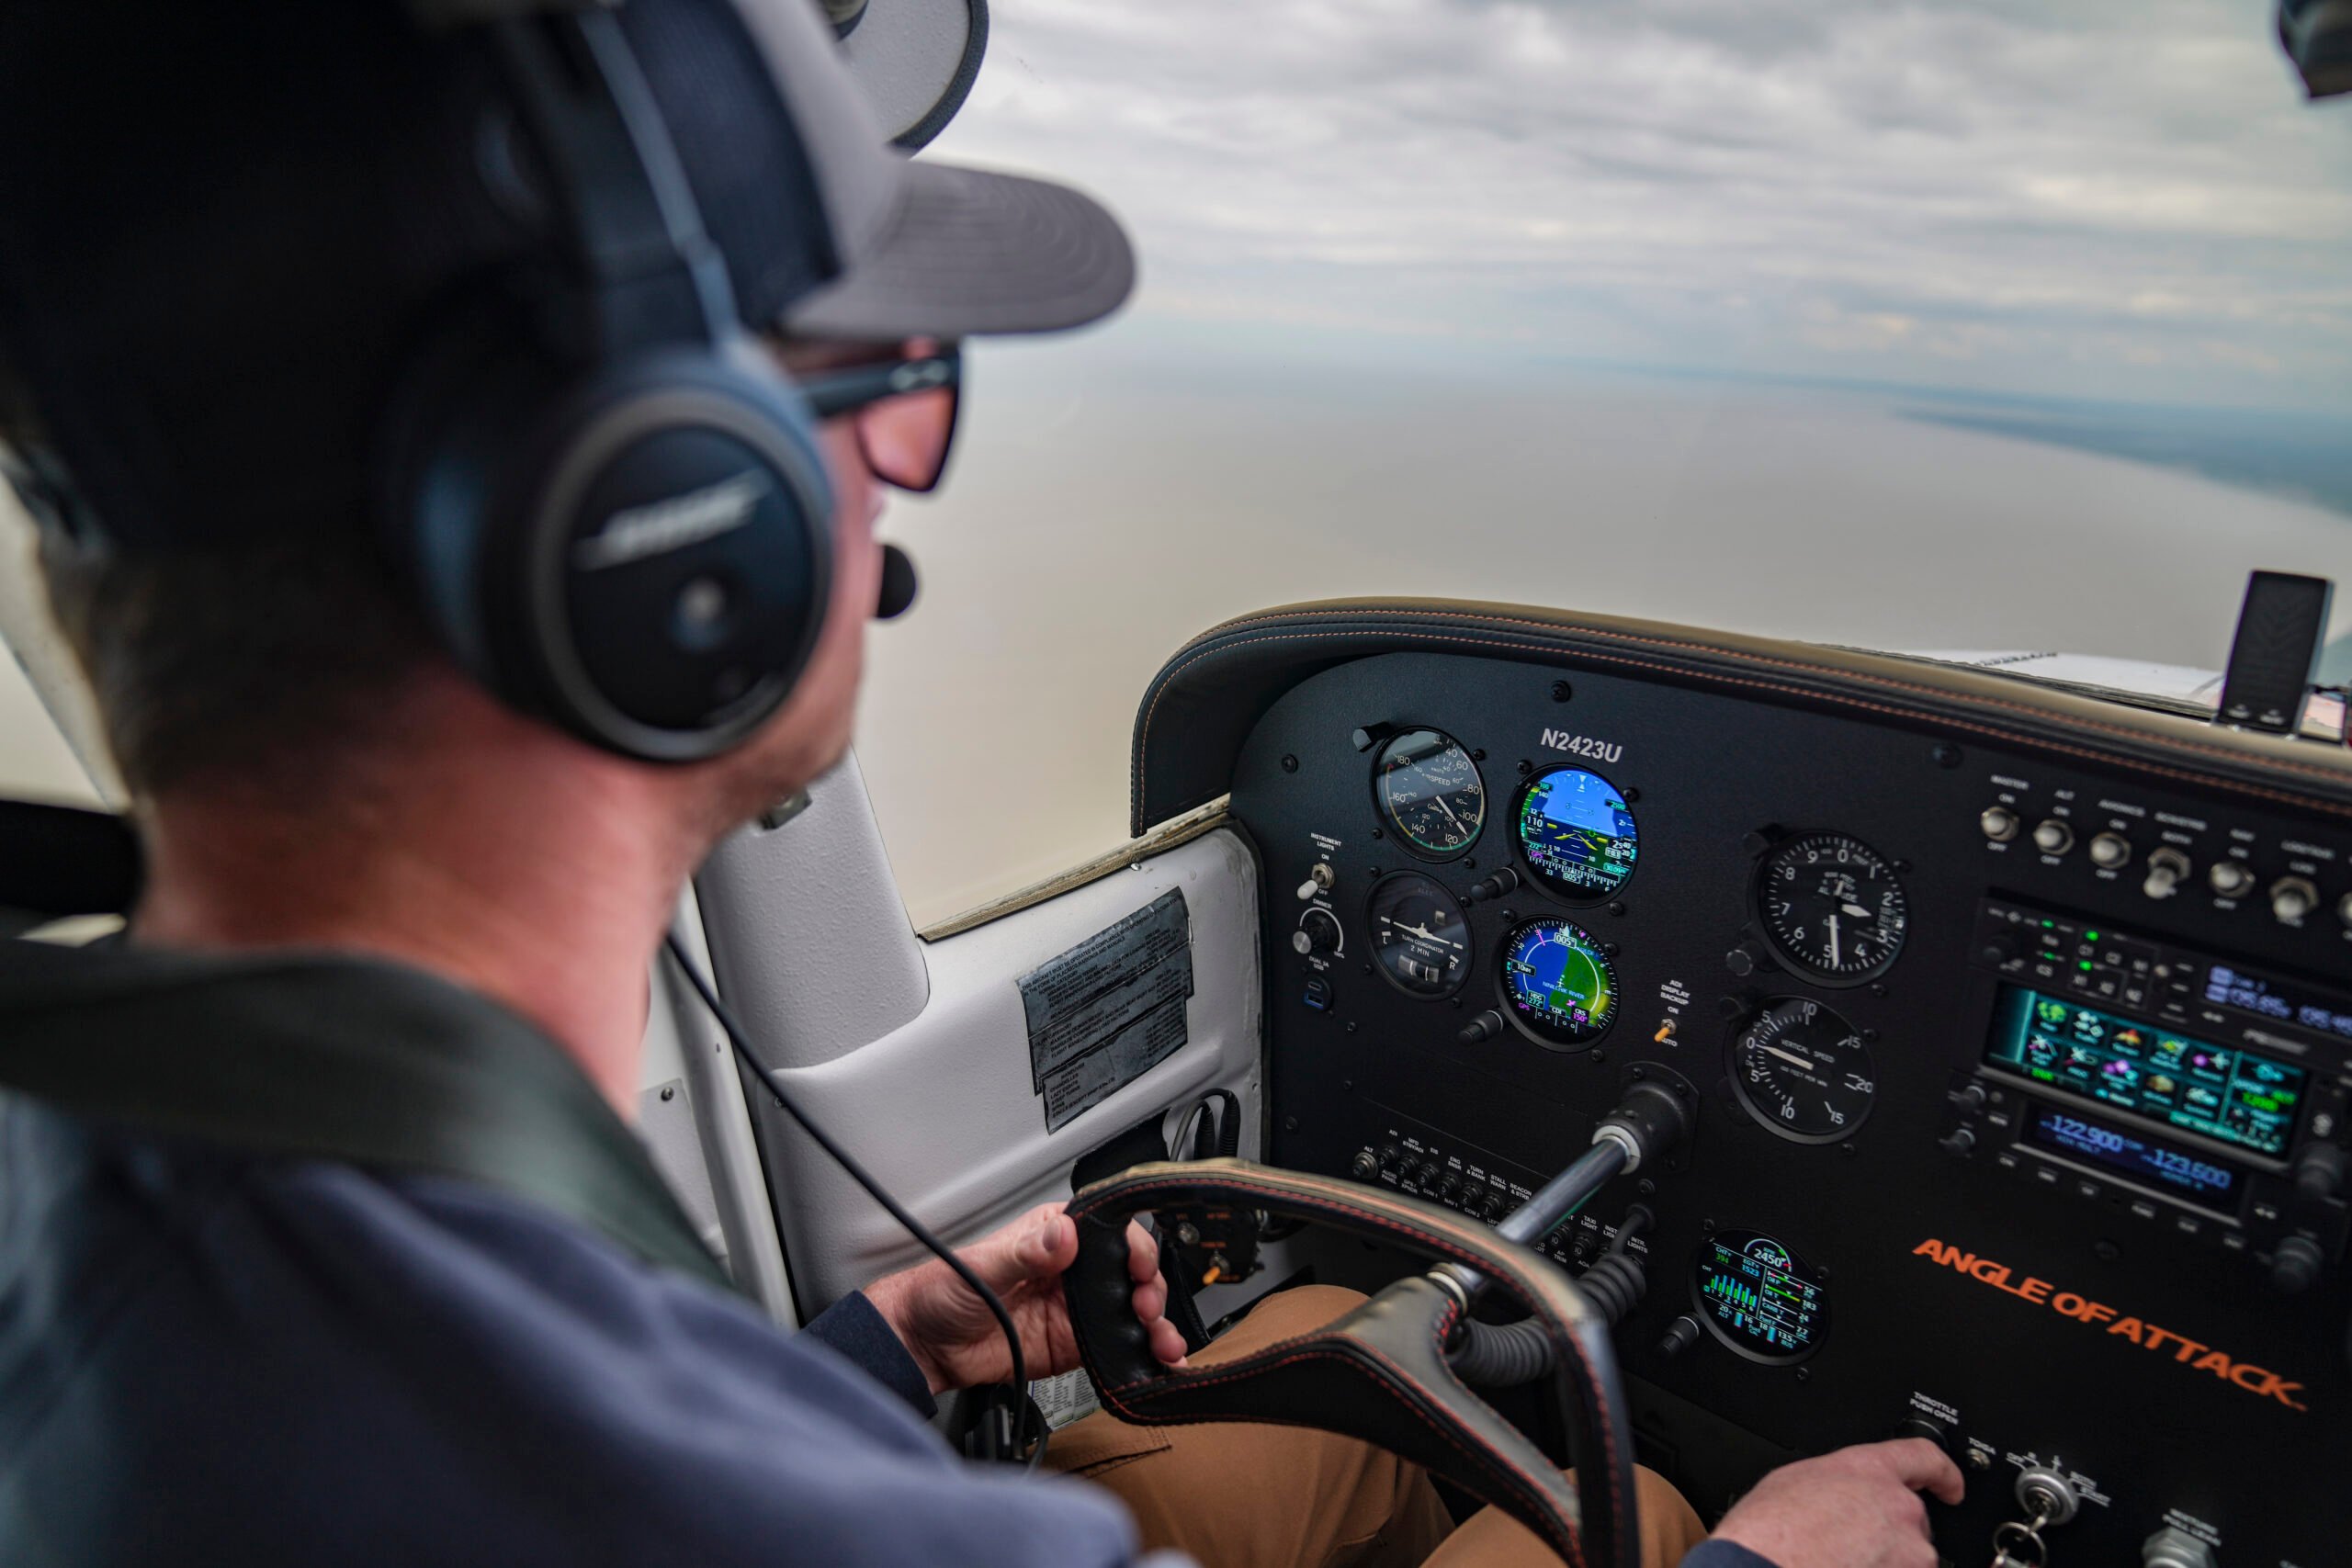 Pilot ineracting with GTN 750Xi in the cockpit of an airplane.